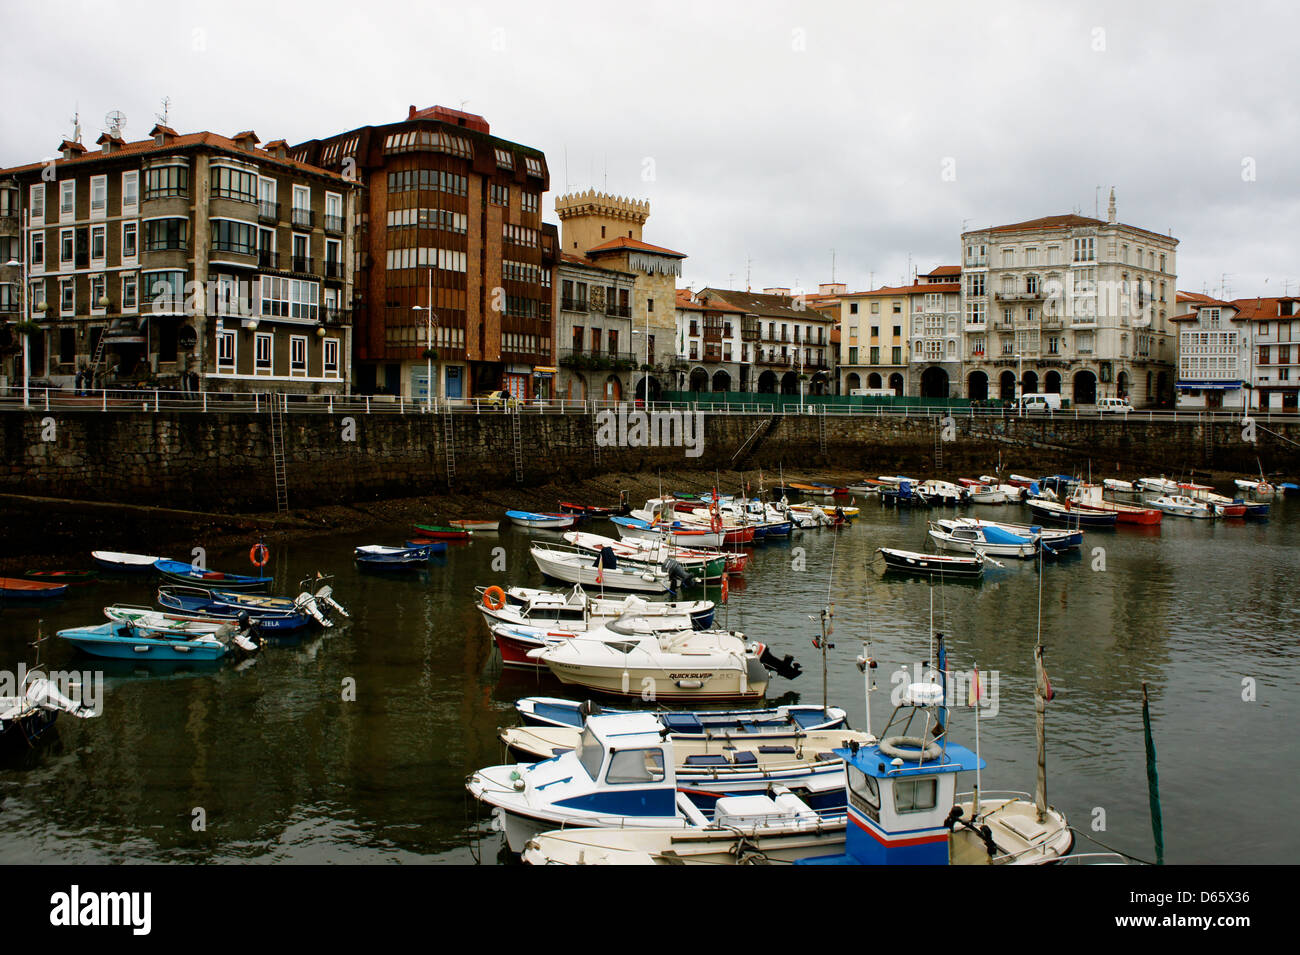 Image taken on a trip to Spain of little fishing village just off the city of Bilbao. This was their harbor. Canon EOS 20D. Stock Photo